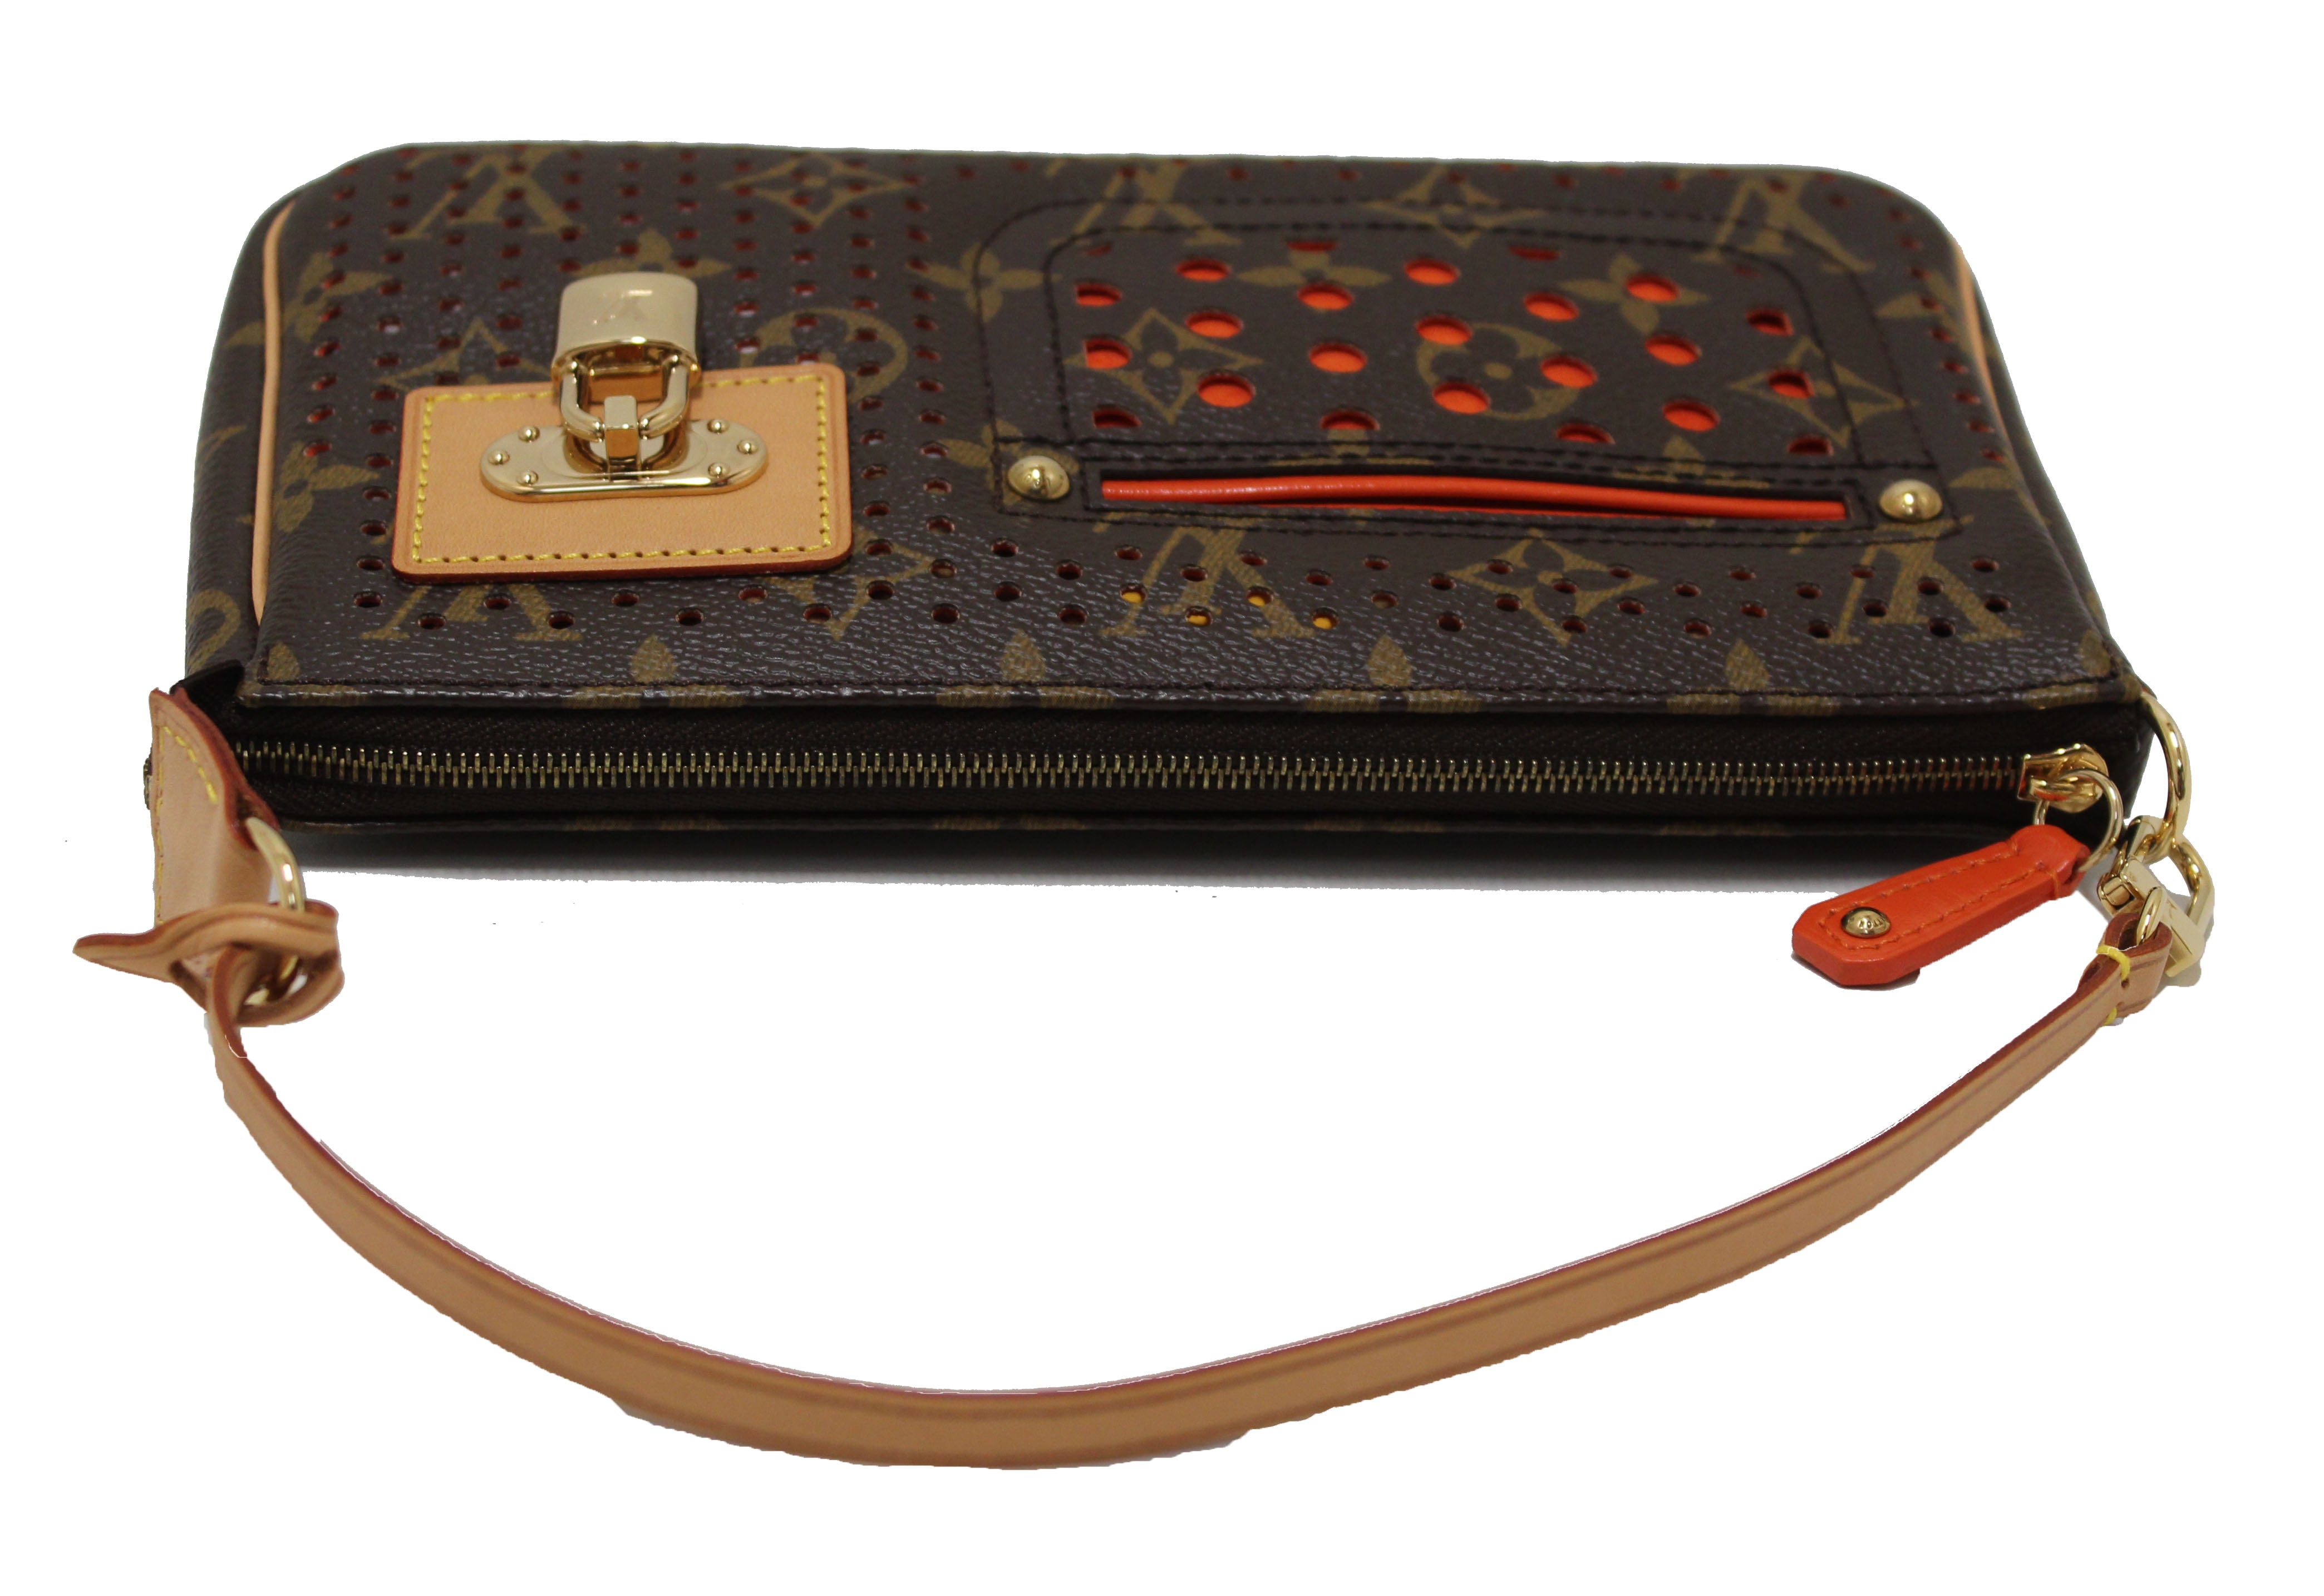 perforated pochette accessoires